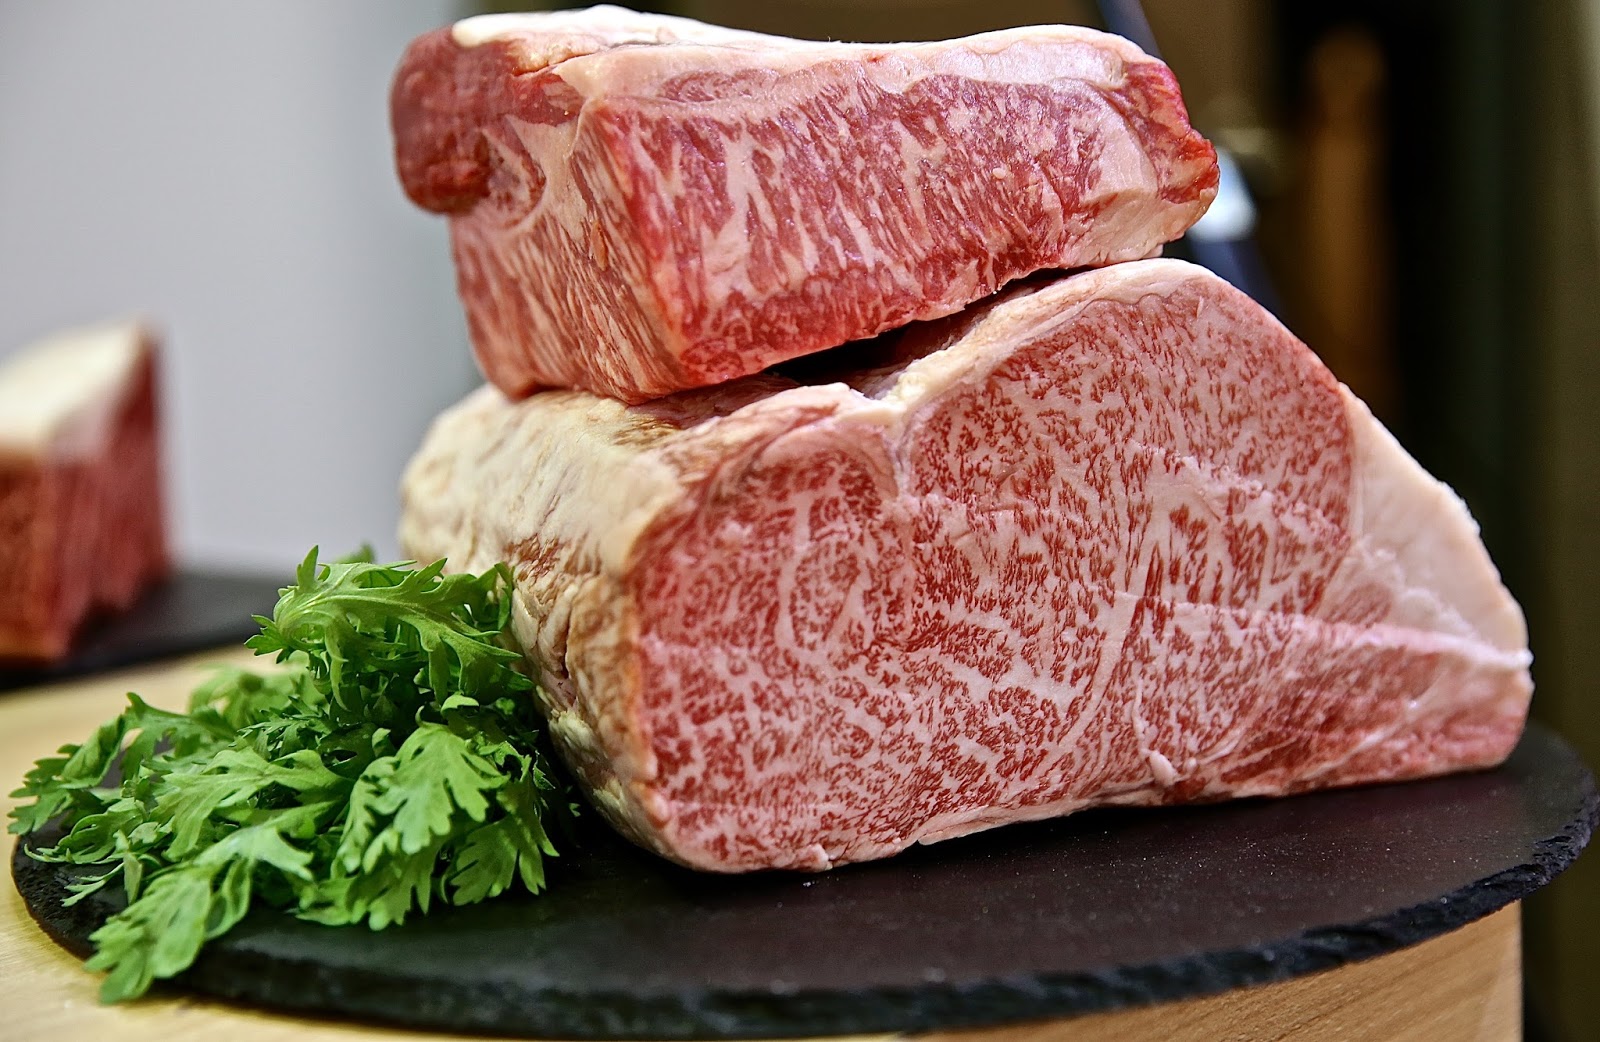 The London Foodie: Do You Know Your Wagyu From Your USDA ...